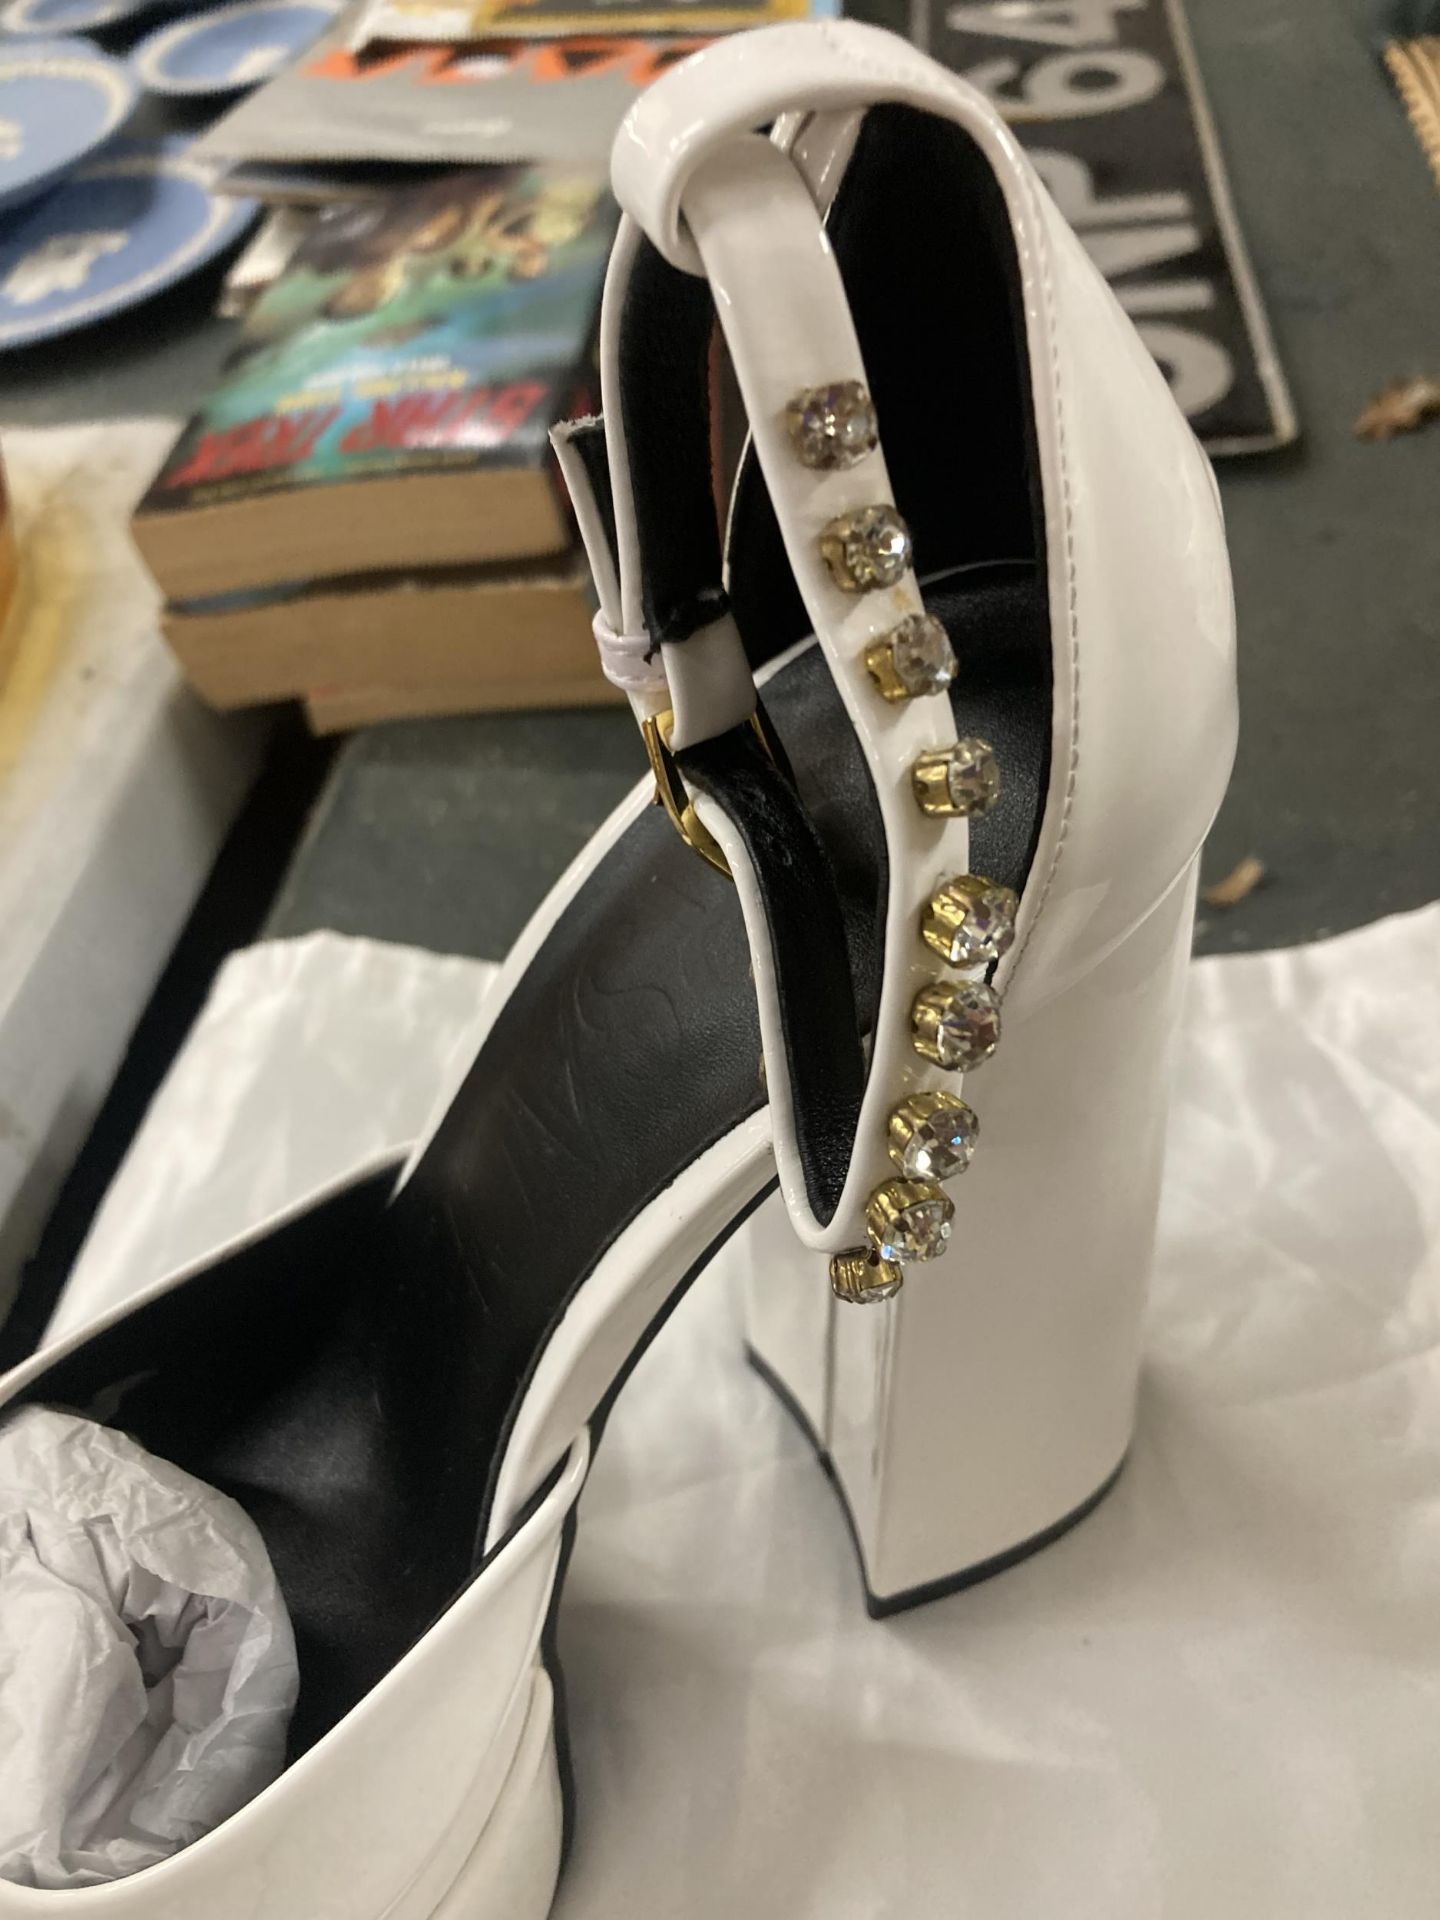 A PAIR OF ITALIAN WHITE HIGH HEELED PLATFORM SHOES, MARKED VERSACE WITH DUST BAG - NO PROVENANCE - Image 2 of 3